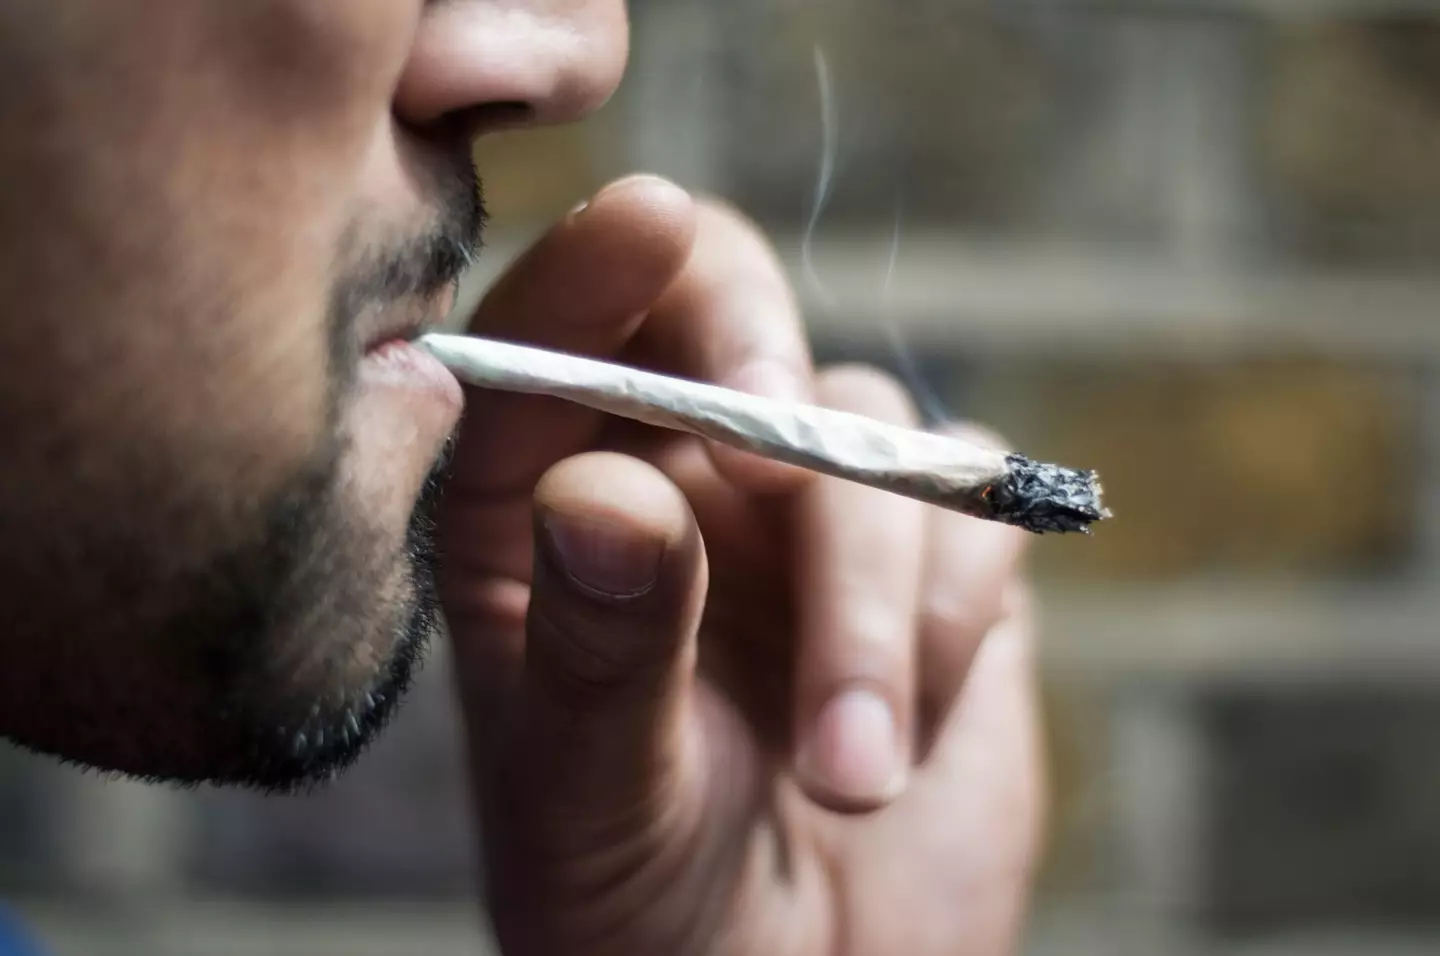 Smoking cannabis could potentially increase the risk of developing atrial fibrillation.